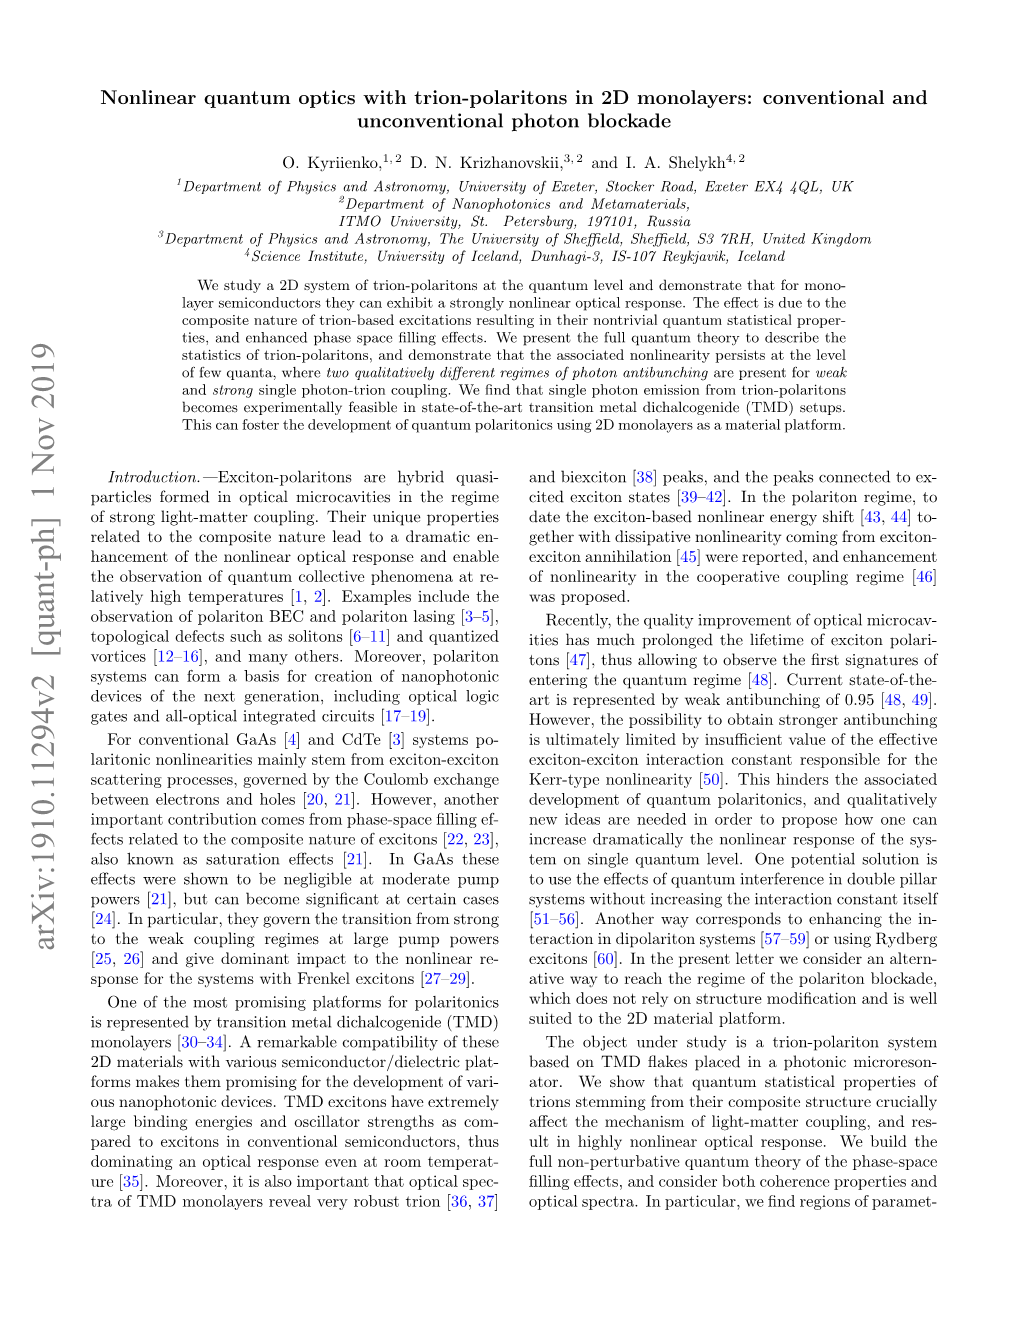 Arxiv:1910.11294V2 [Quant-Ph] 1 Nov 2019 [25, 26] and Give Dominant Impact to the Nonlinear Re- Excitons [60]